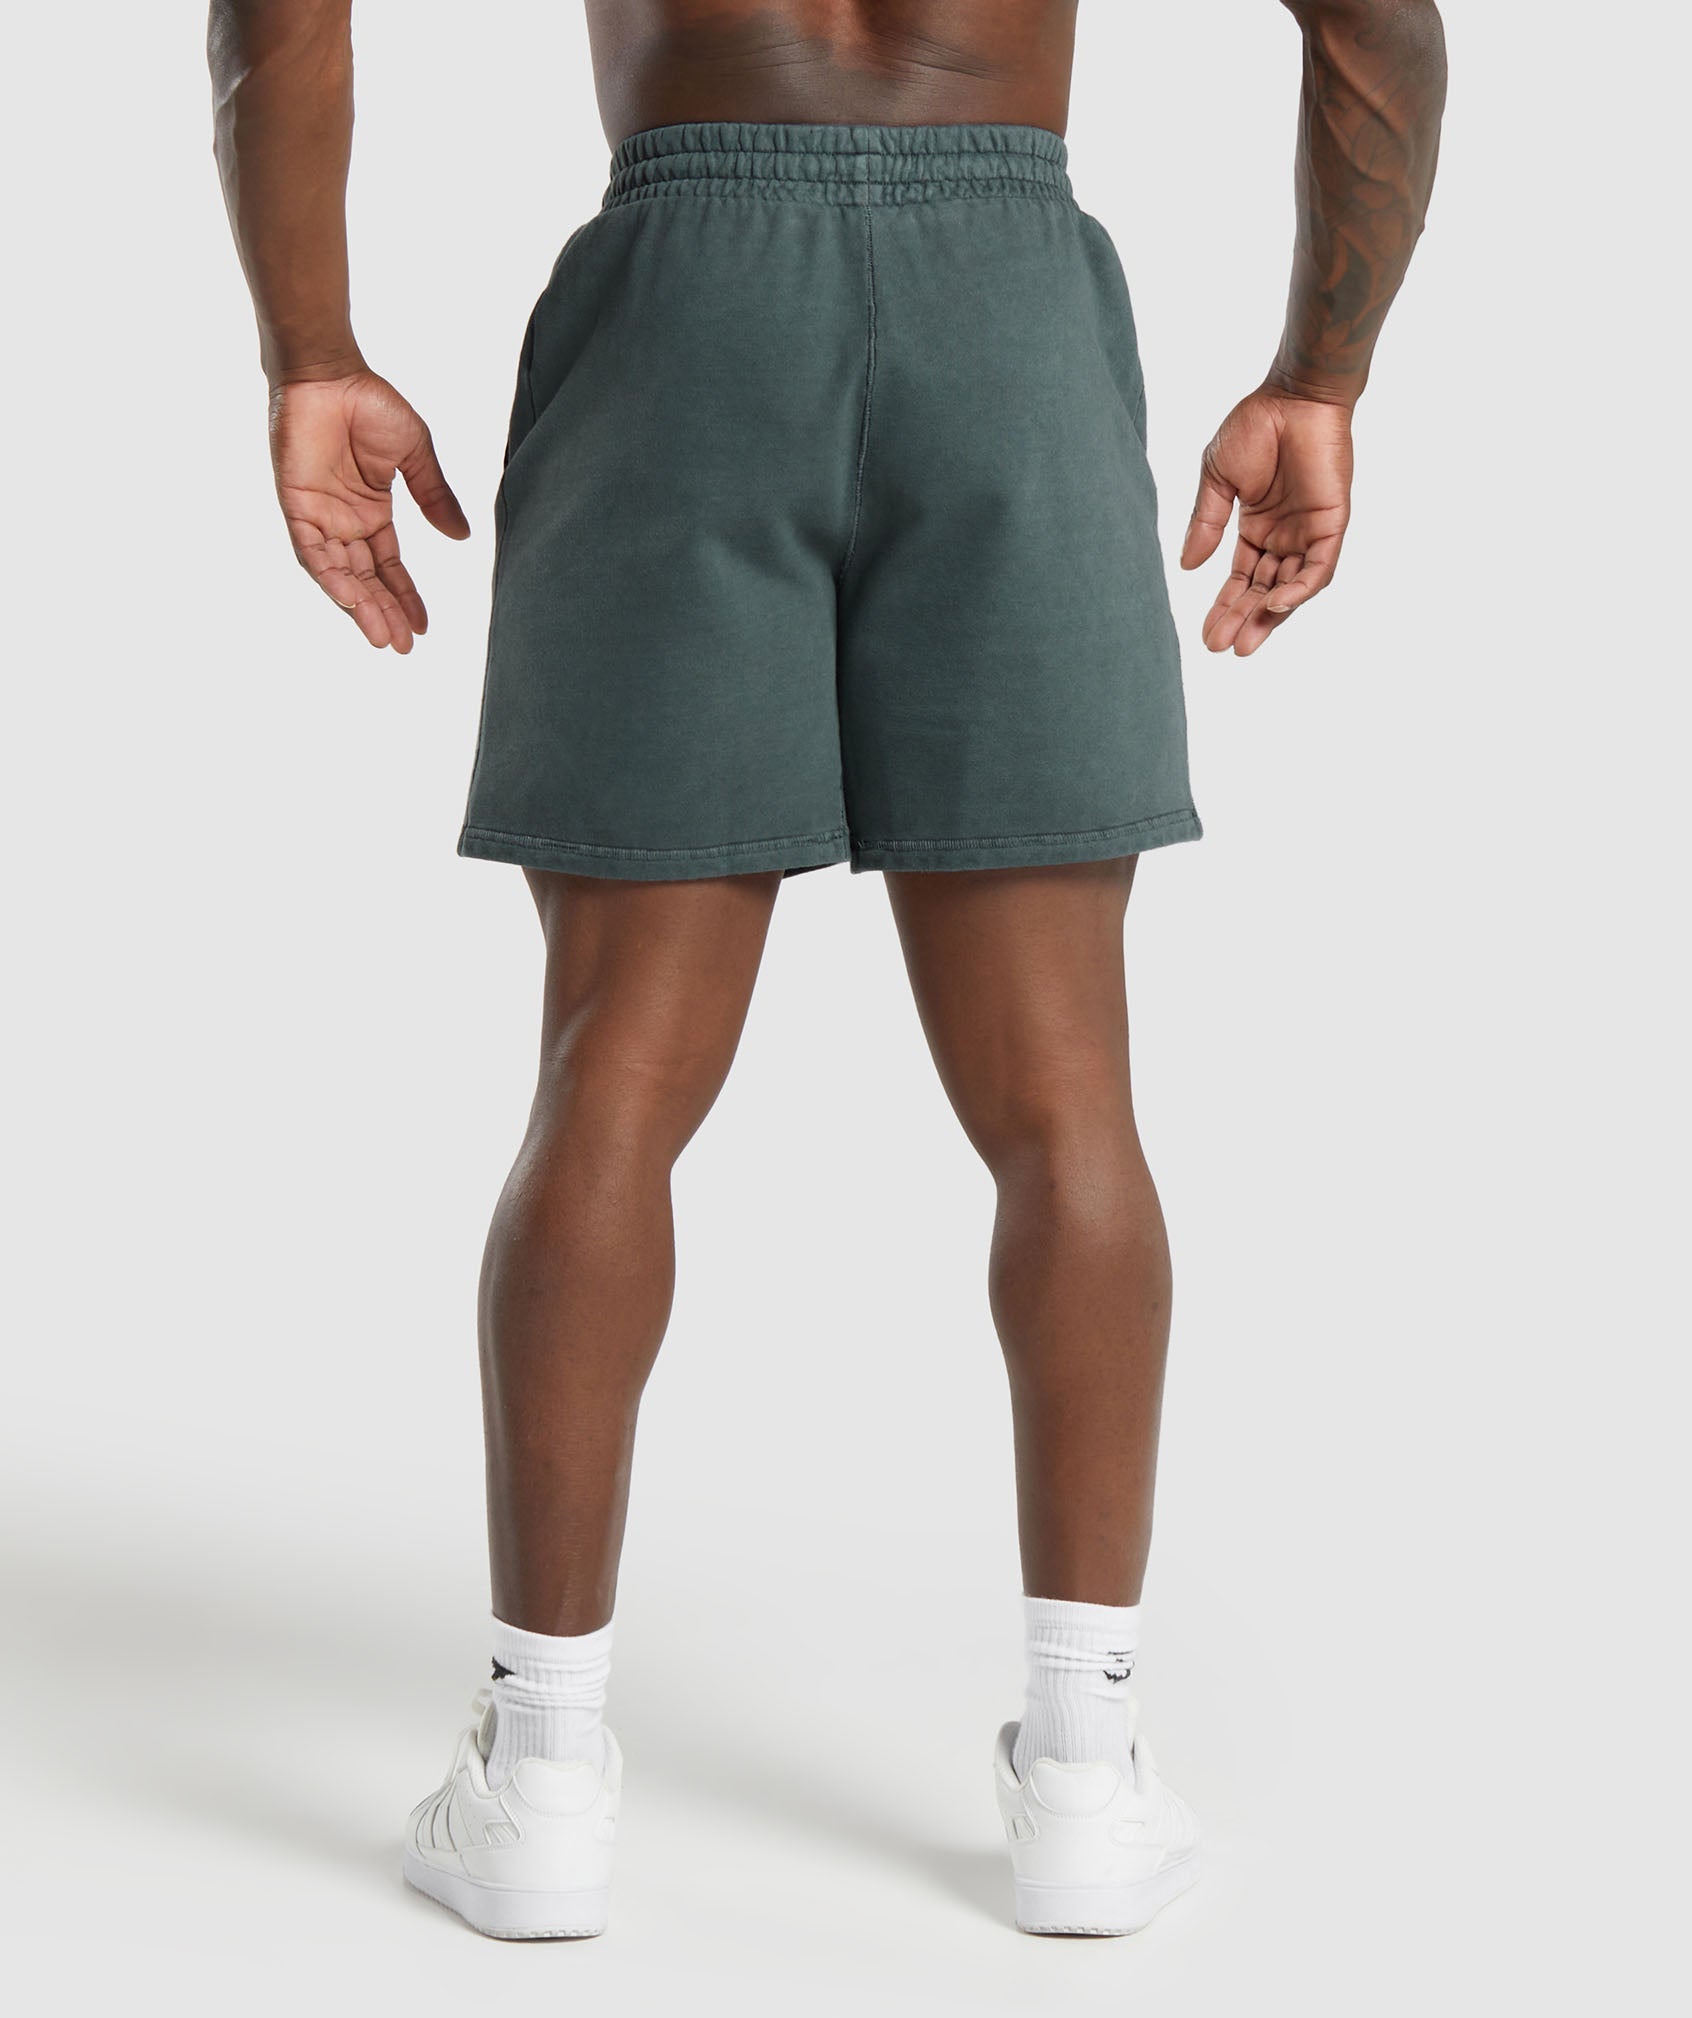 Premium Legacy Shorts in Cargo Teal - view 2